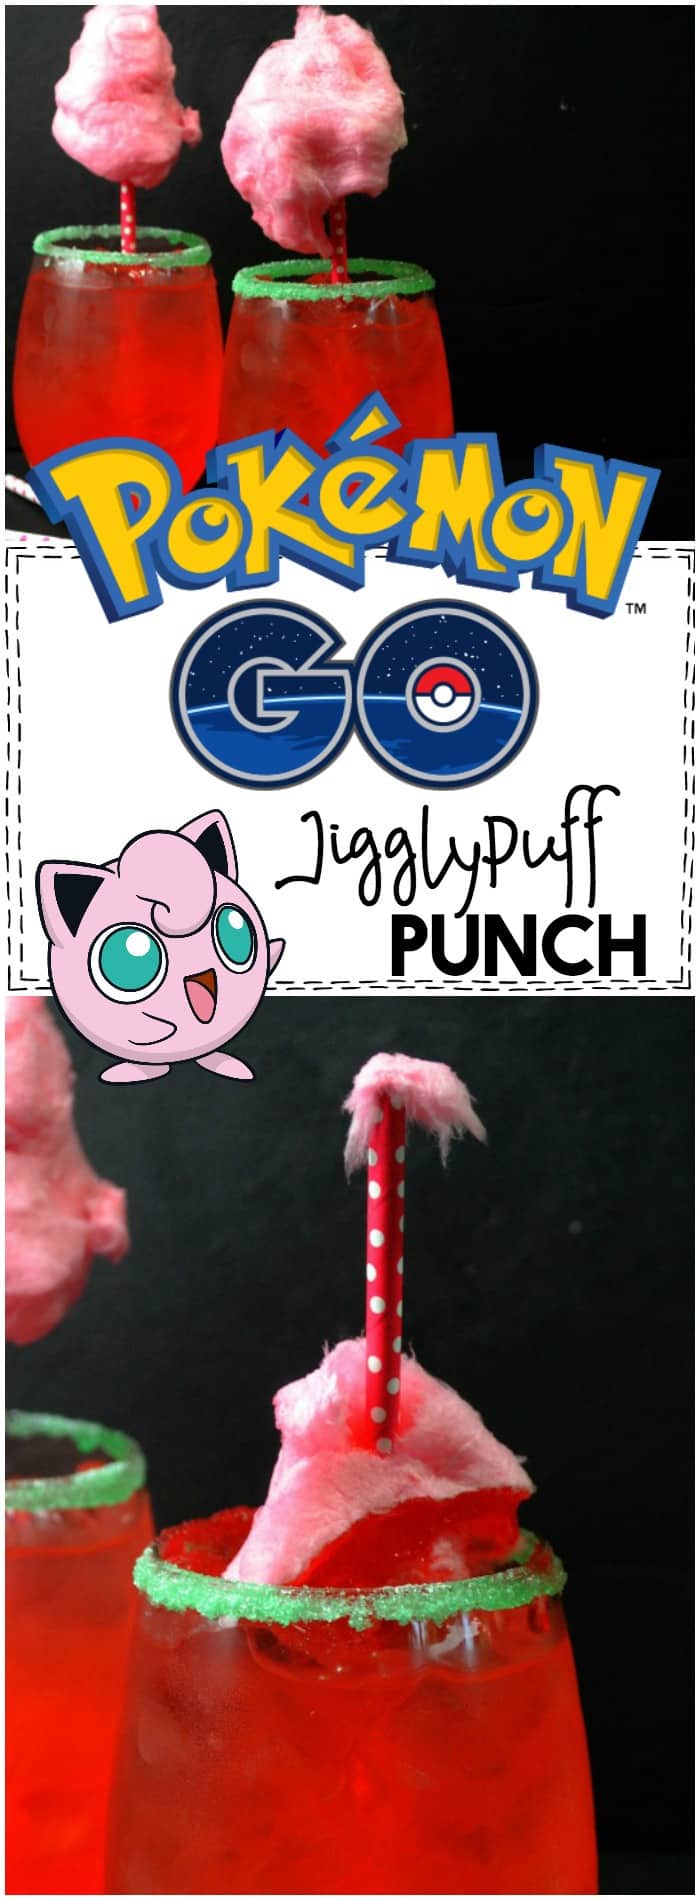 Oh, the kids are JUST going to love this Jigglypuff punch inspired by Pokemon GO! LOL!